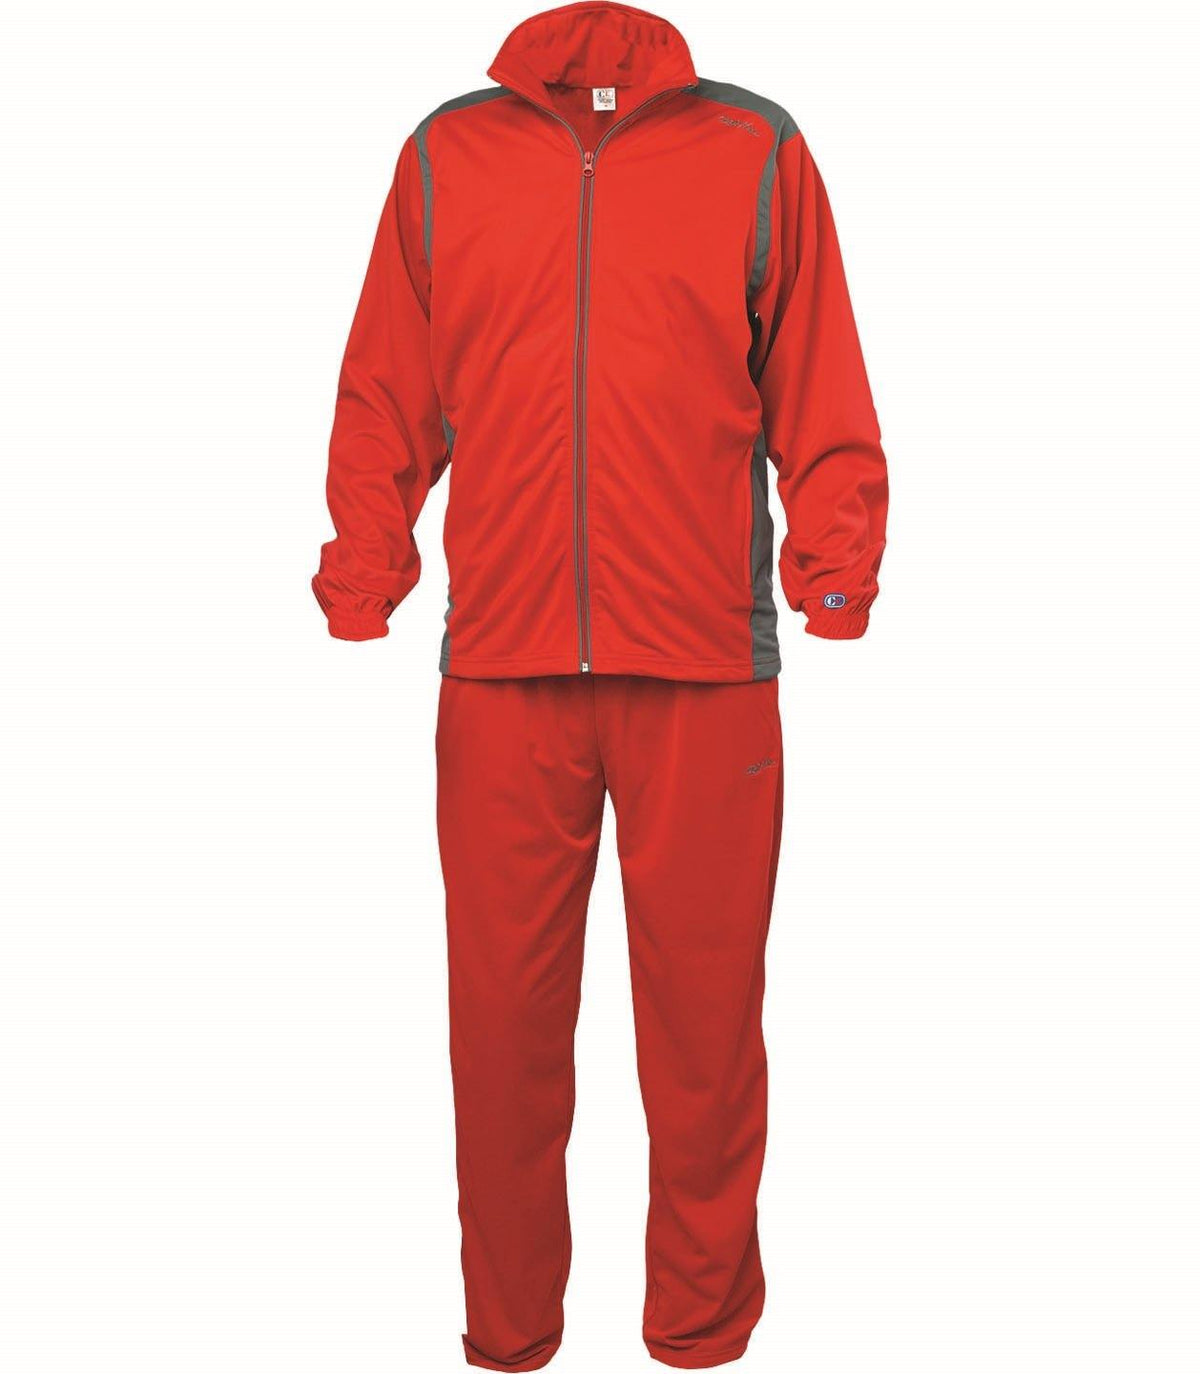 Cliff Keen | WS966 | The All-American Stock Warmup Suit - Great Call Athletics